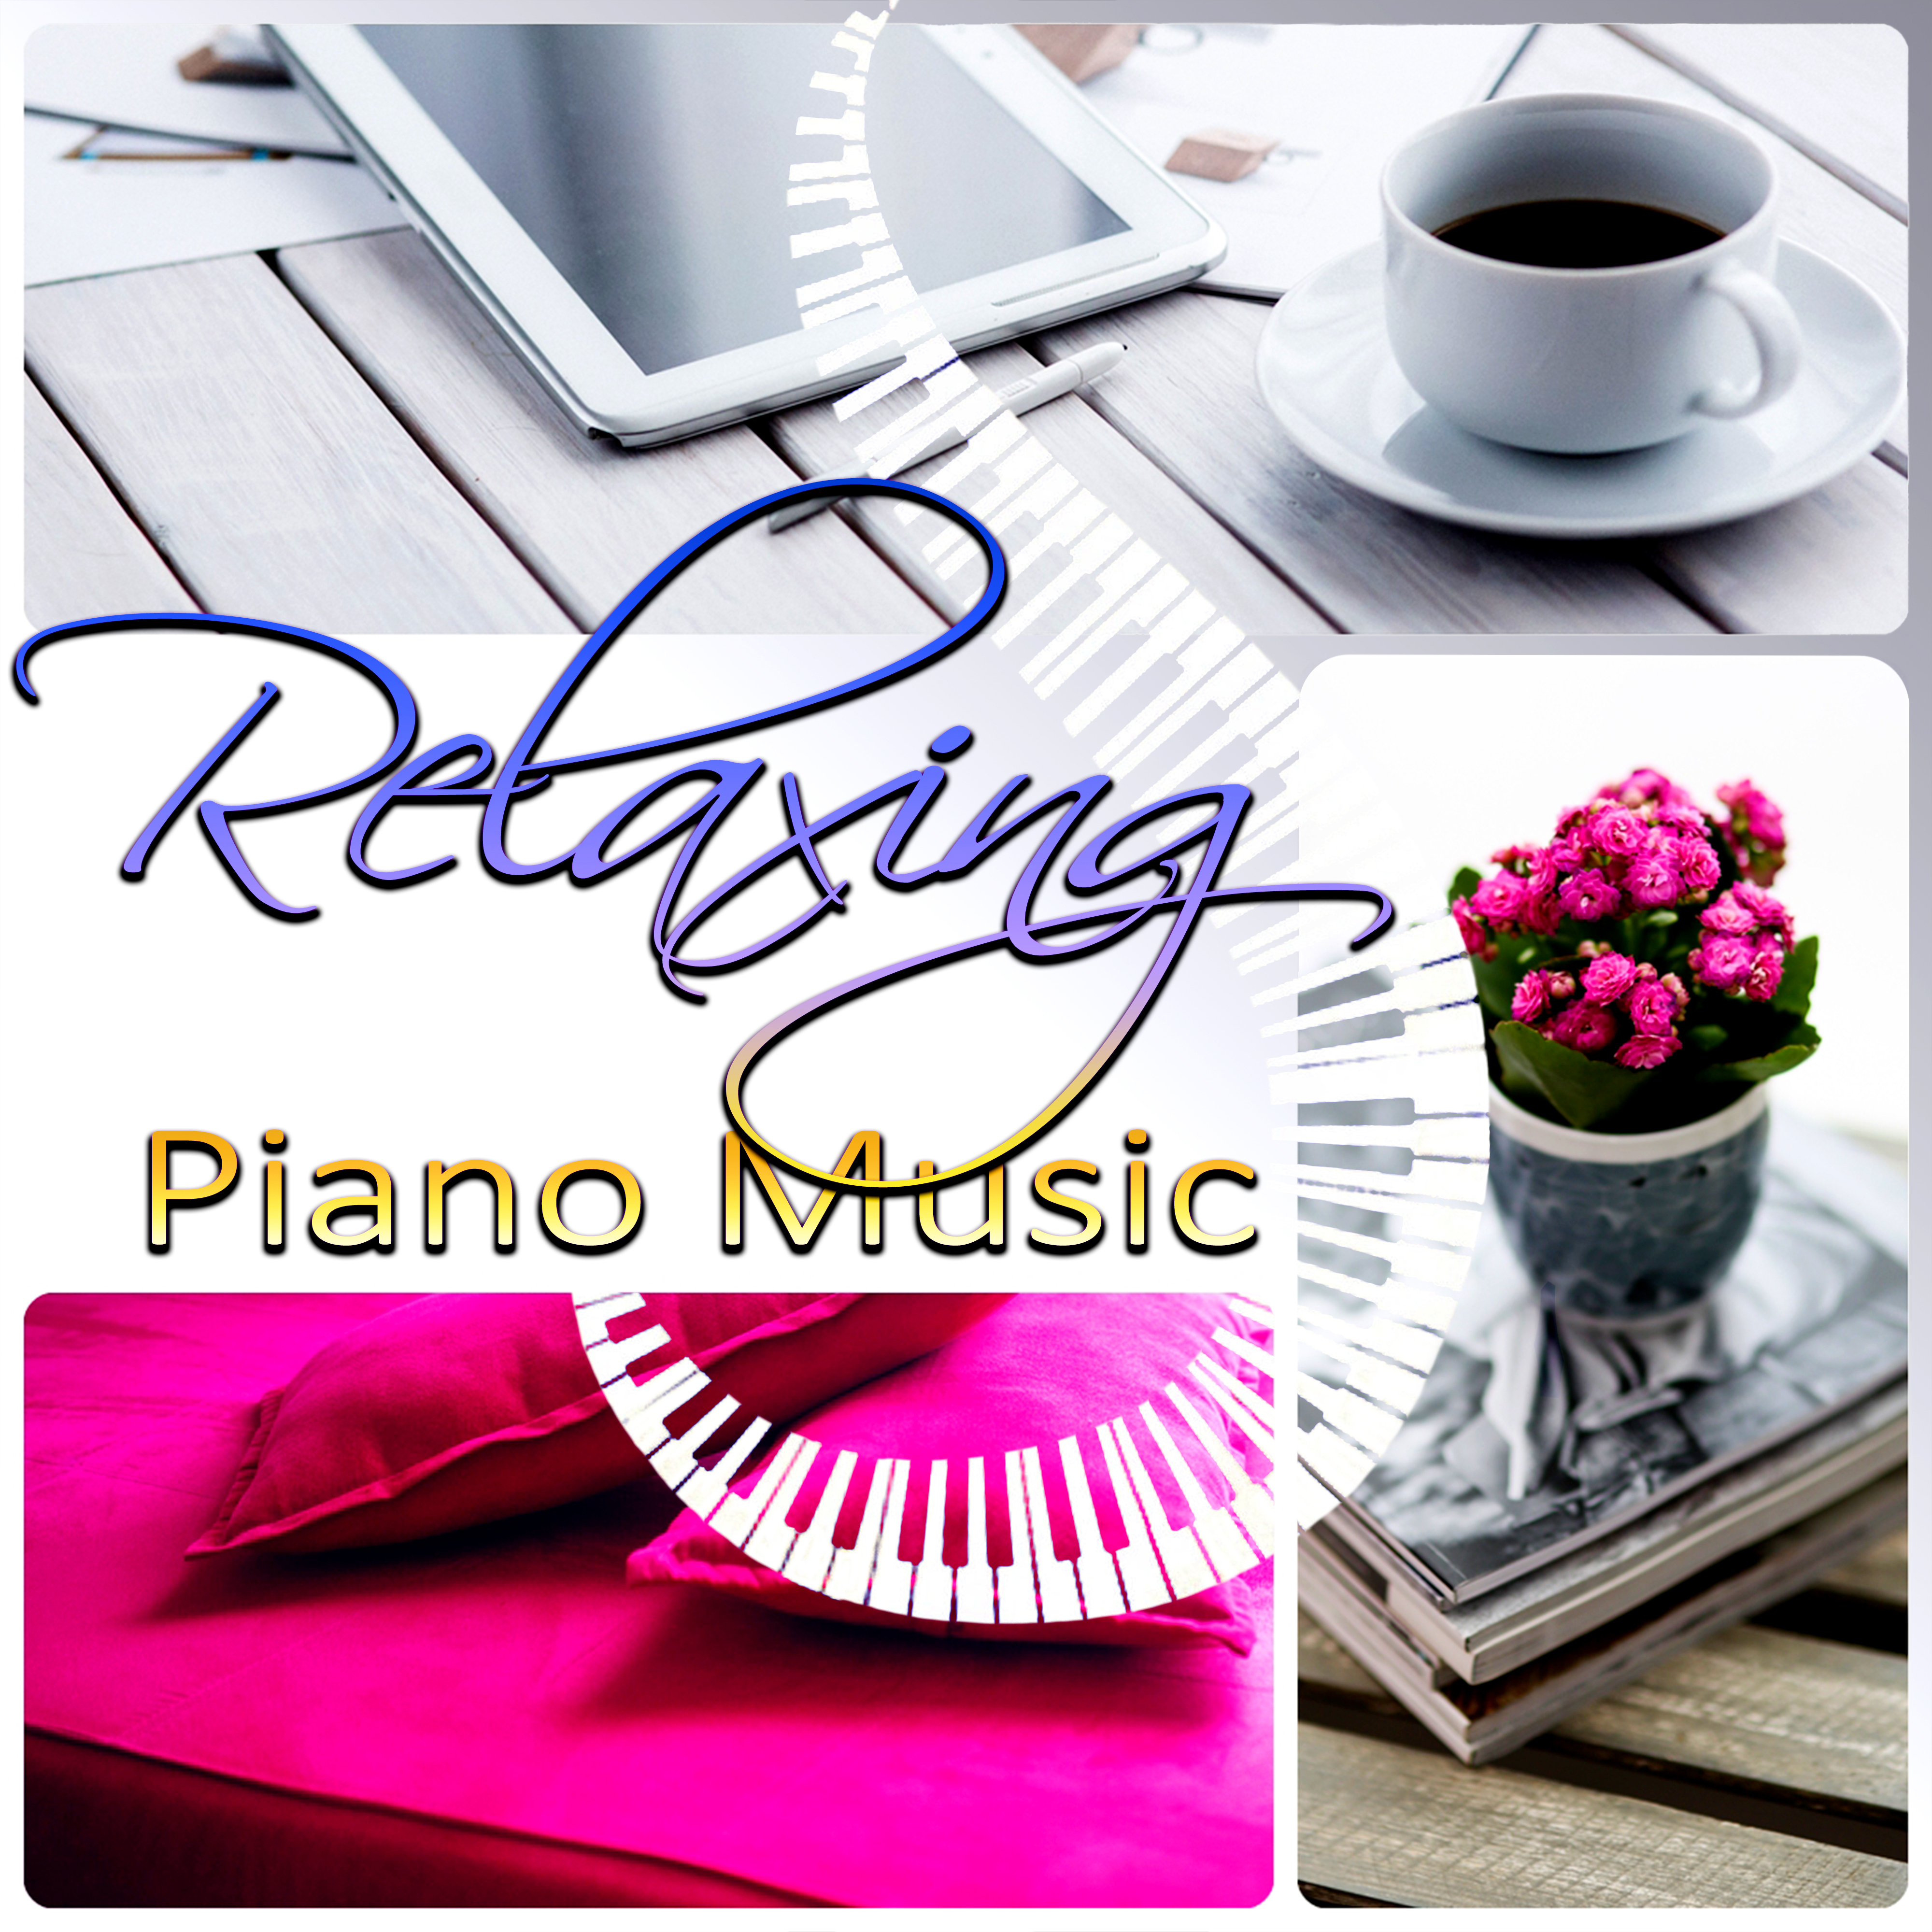 Relaxing Piano Music - Easy Listening Music, Relaxing Sounds for Study, Sleep, Background Music for Party, Restaurant, Dinner and Chill Lounge, Smooth Jazz Paino